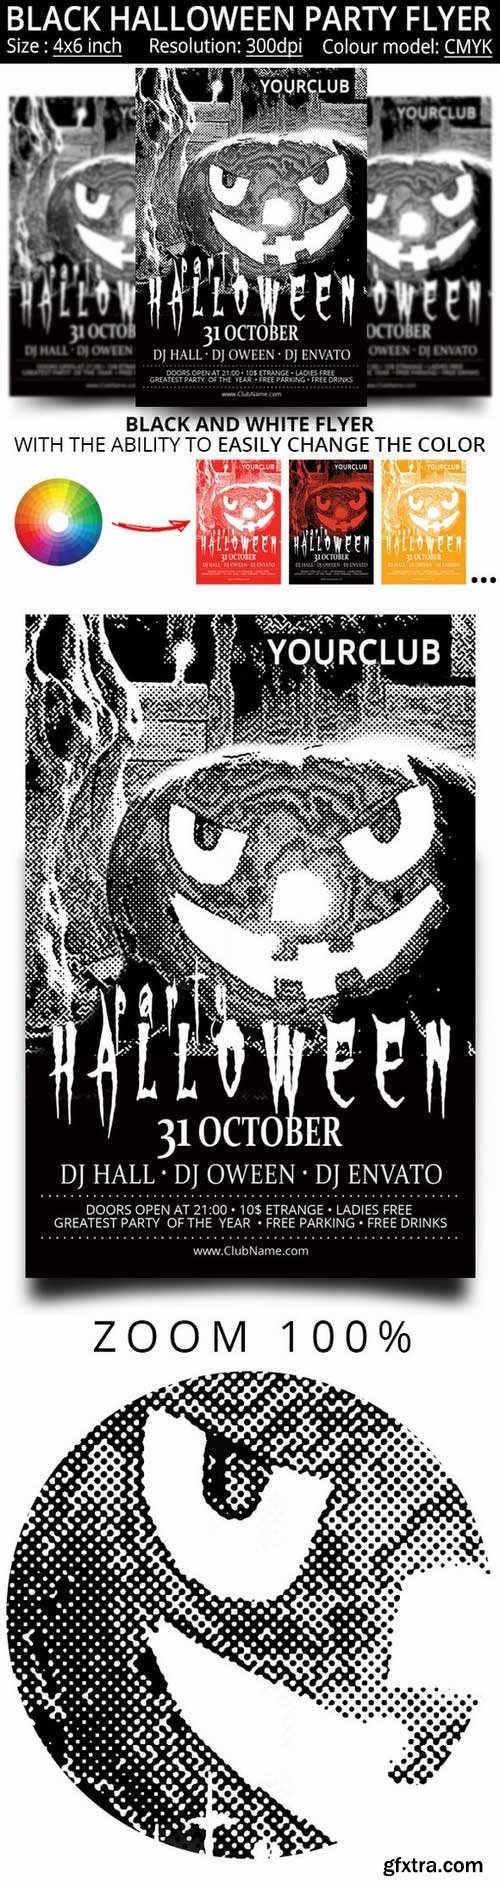 CM - Black and white flyer for the Hallow 362875